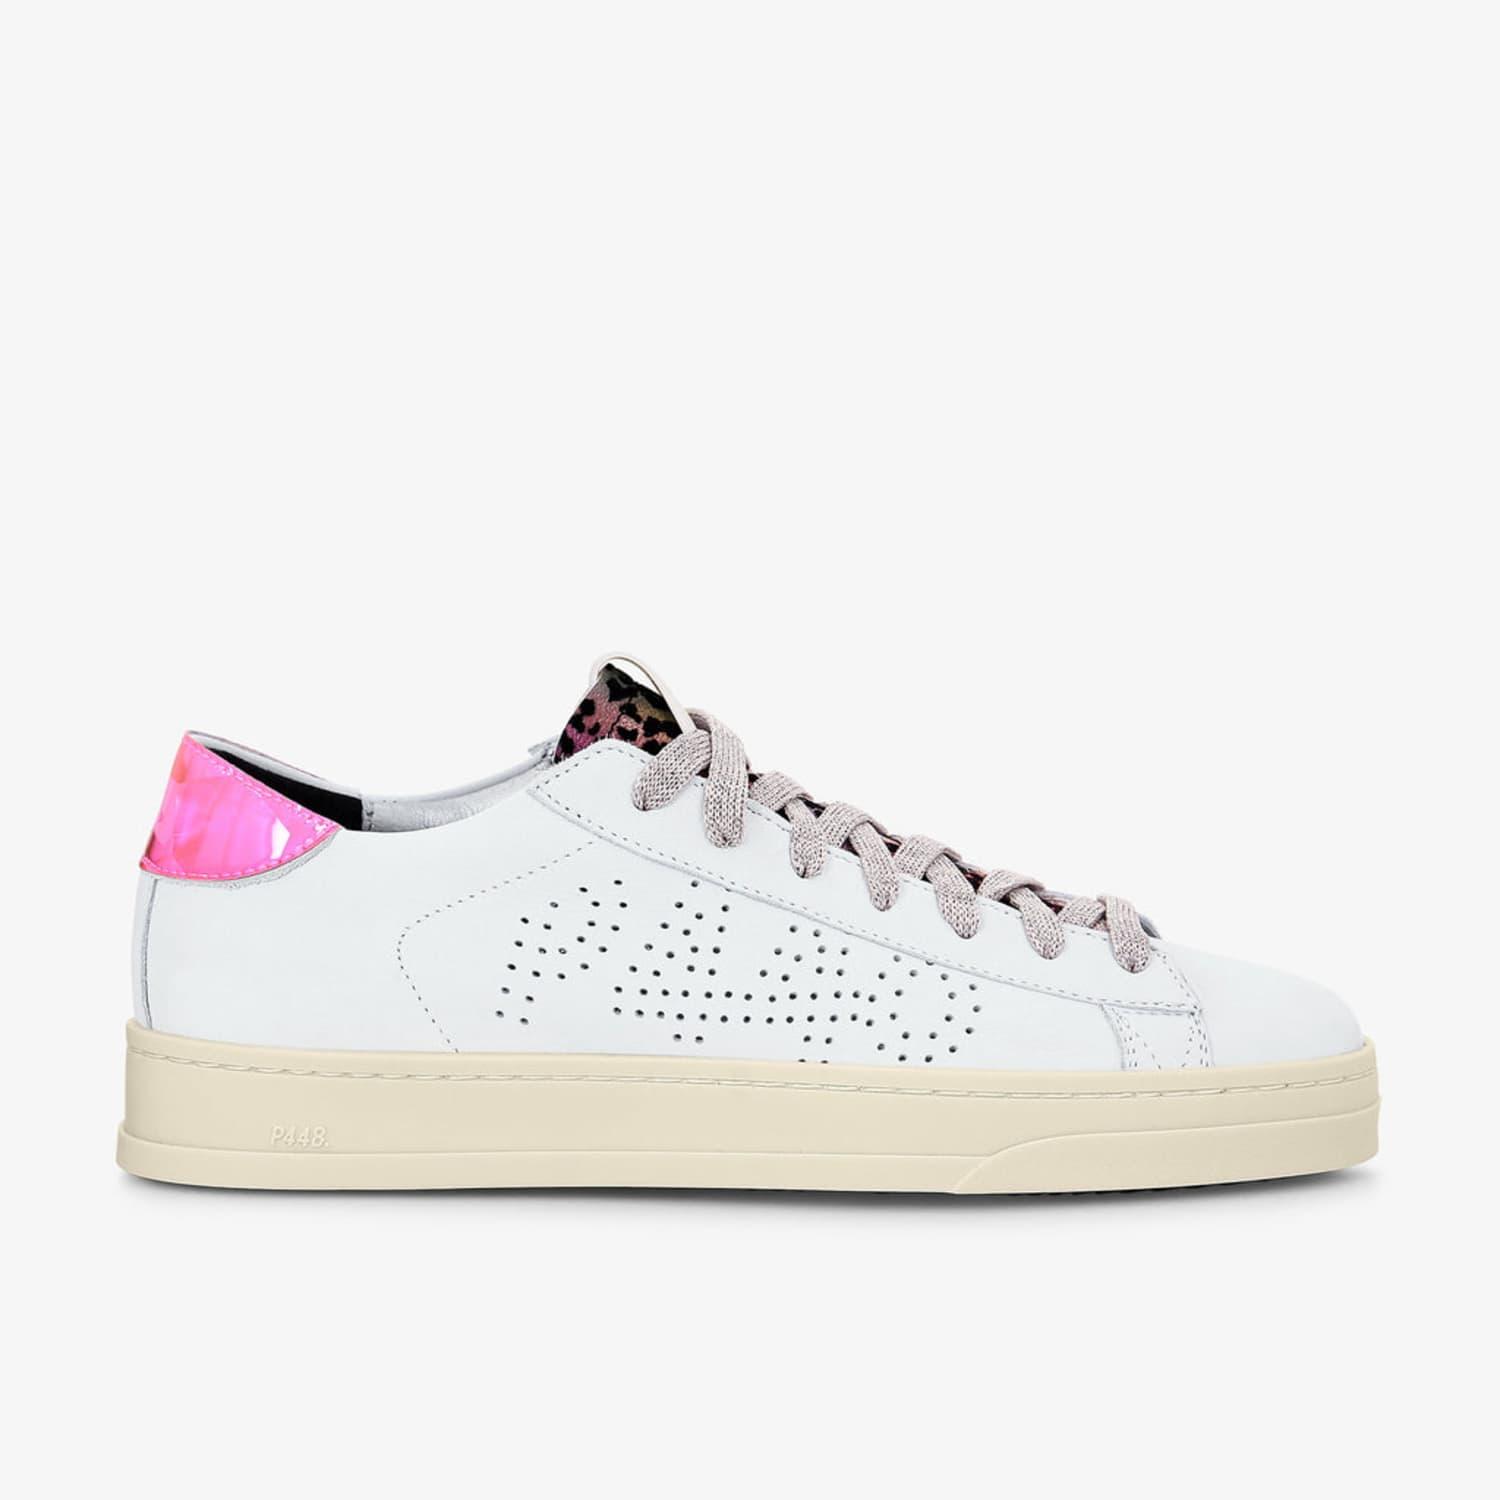 P448 Rainbow Leopard Jack Reflector Trainer Sneakers in White | Lyst